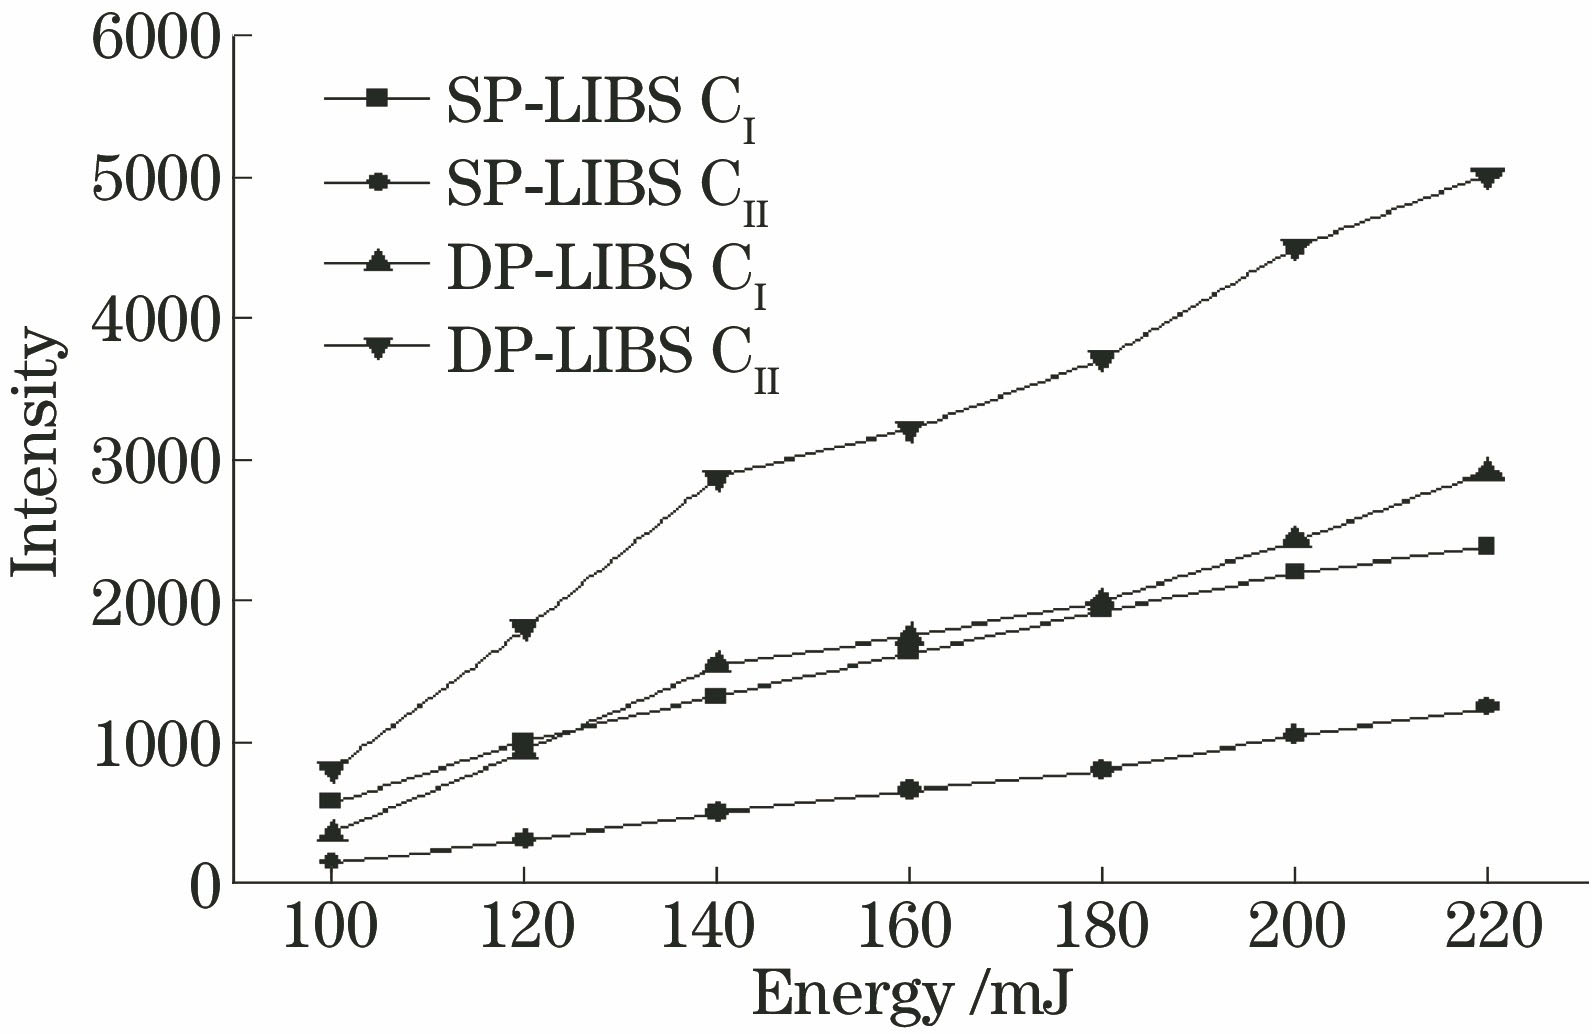 Comparison of C element spectral lines under single and double pulses with different energies